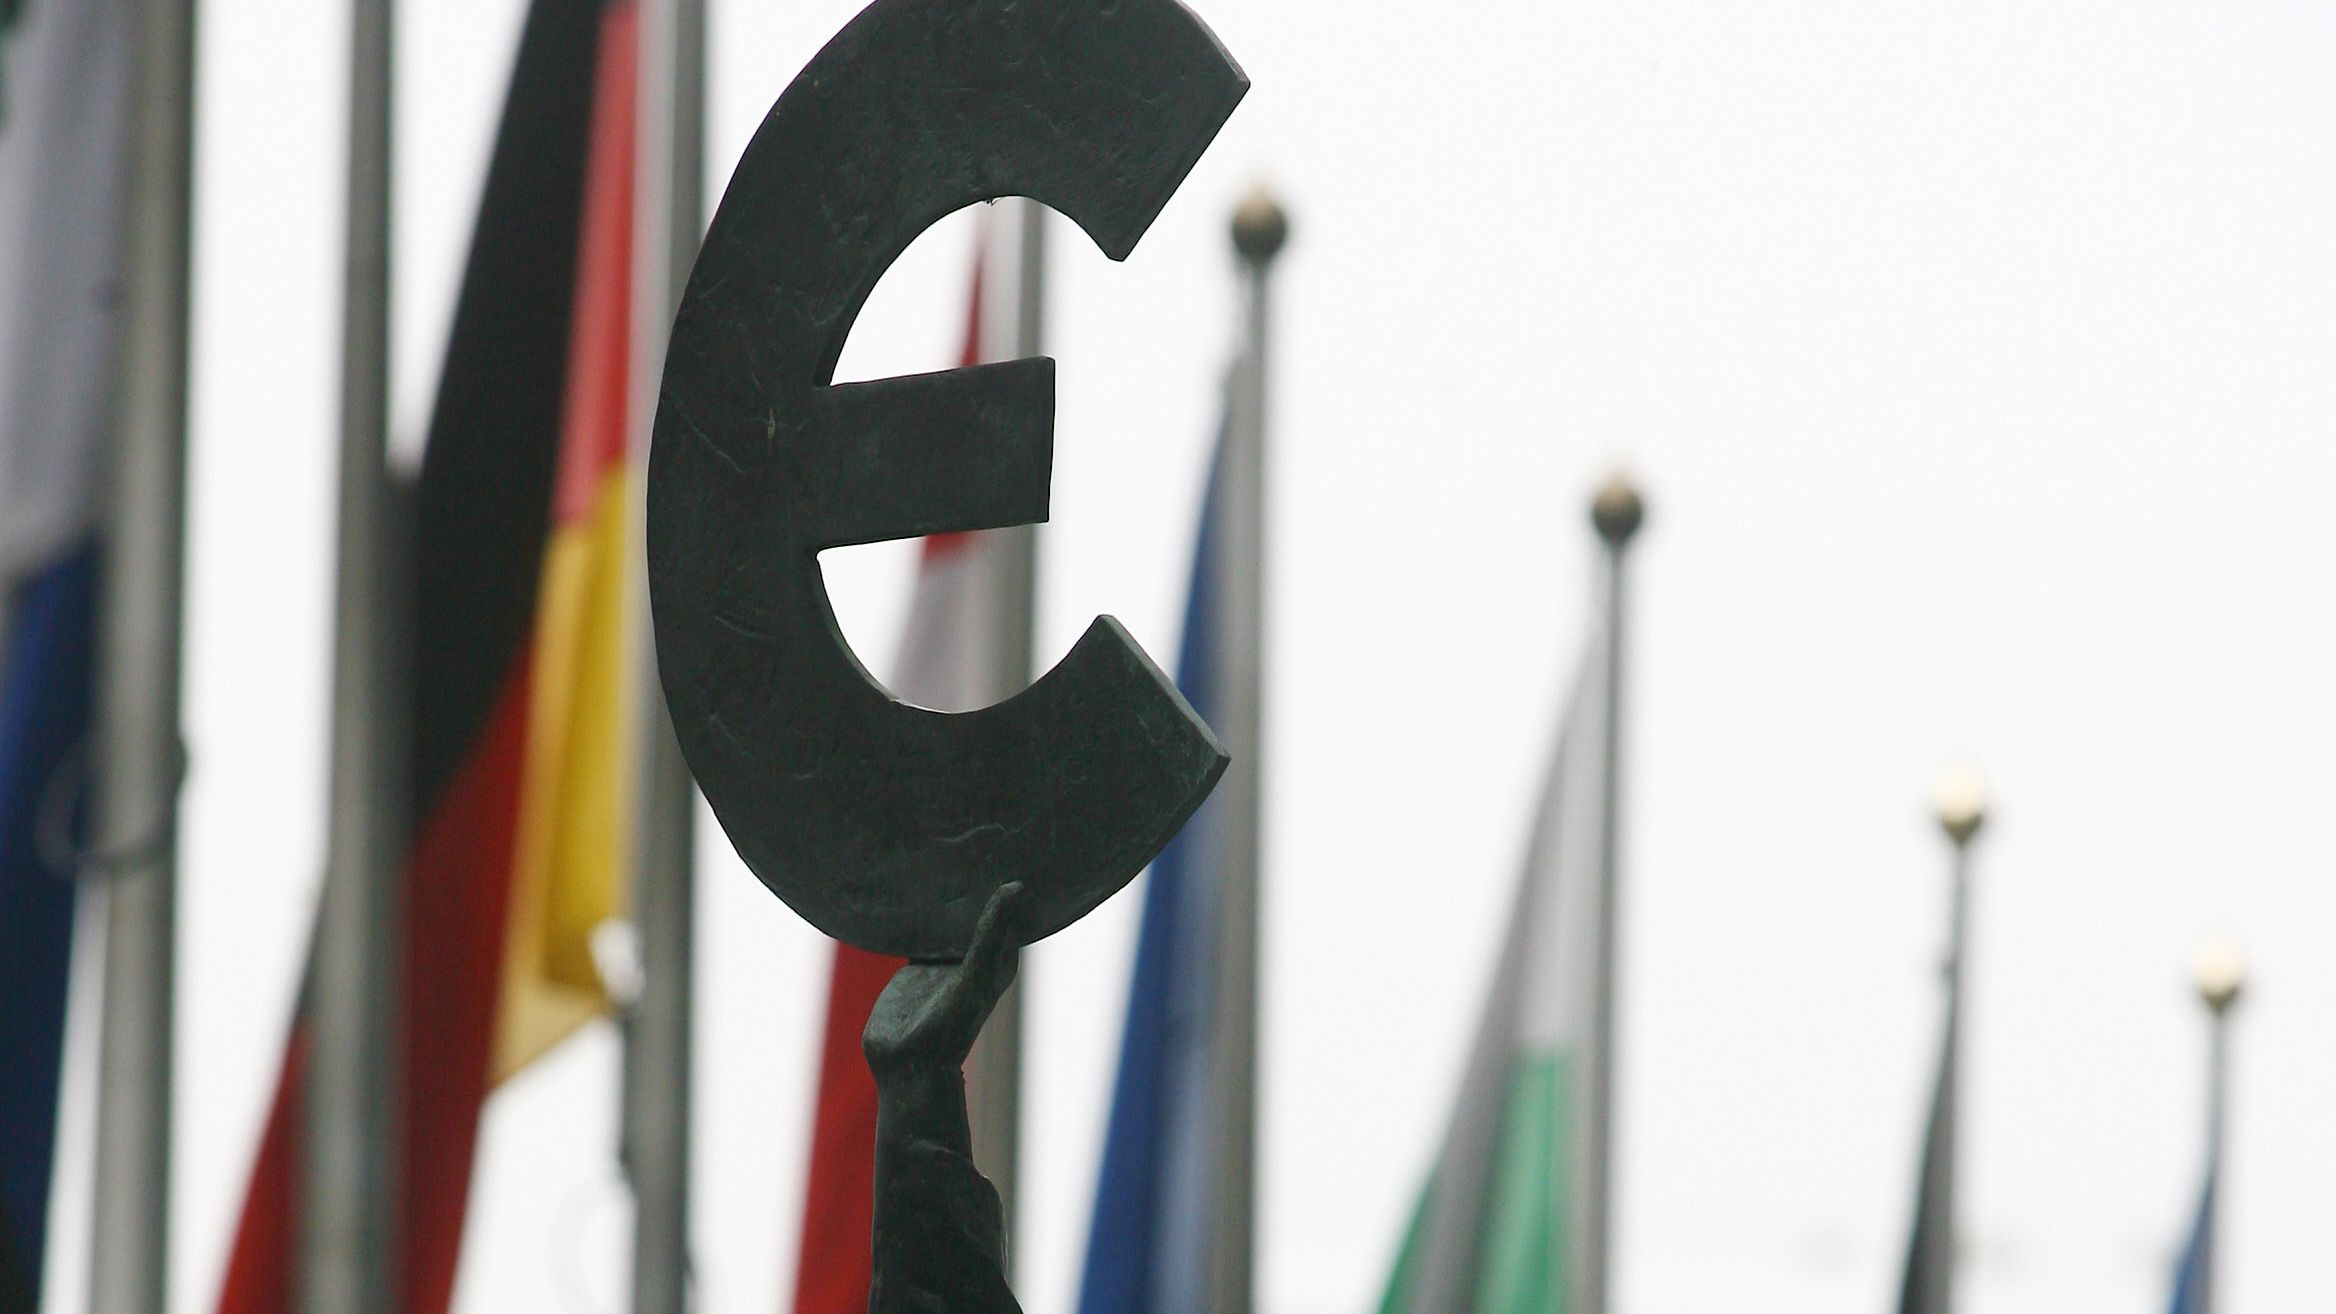 A file image of a statue brandishing a Euro symbol outside the EU parliament in Brussels.